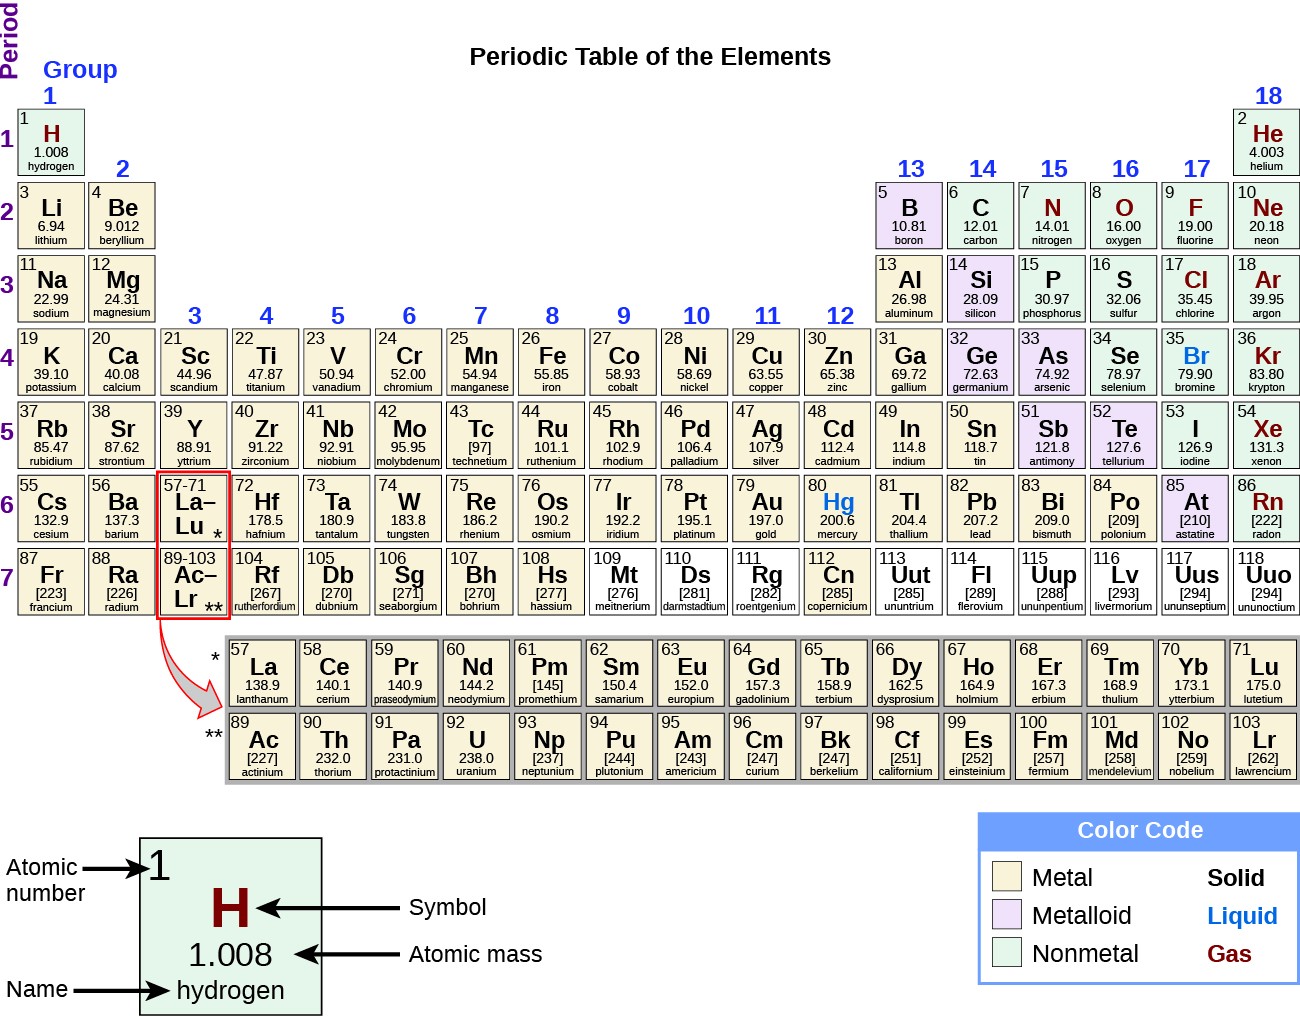 On this depiction of the periodic table, the metals are indicated with a yellow color and dominate the left two thirds of the periodic table. The nonmetals are colored peach and are largely confined to the upper right area of the table, with the exception of hydrogen, H, which is located in the extreme upper left of the table. The metalloids are colored purple and form a diagonal border between the metal and nonmetal areas of the table. Group 13 contains both metals and metalloids. Group 17 contains both nonmetals and metalloids. Groups 14 through 16 contain at least one representative of a metal, a metalloid, and a nonmetal. A key shows that, at room temperature, metals are solids, metalloids are liquids, and nonmetals are gases.